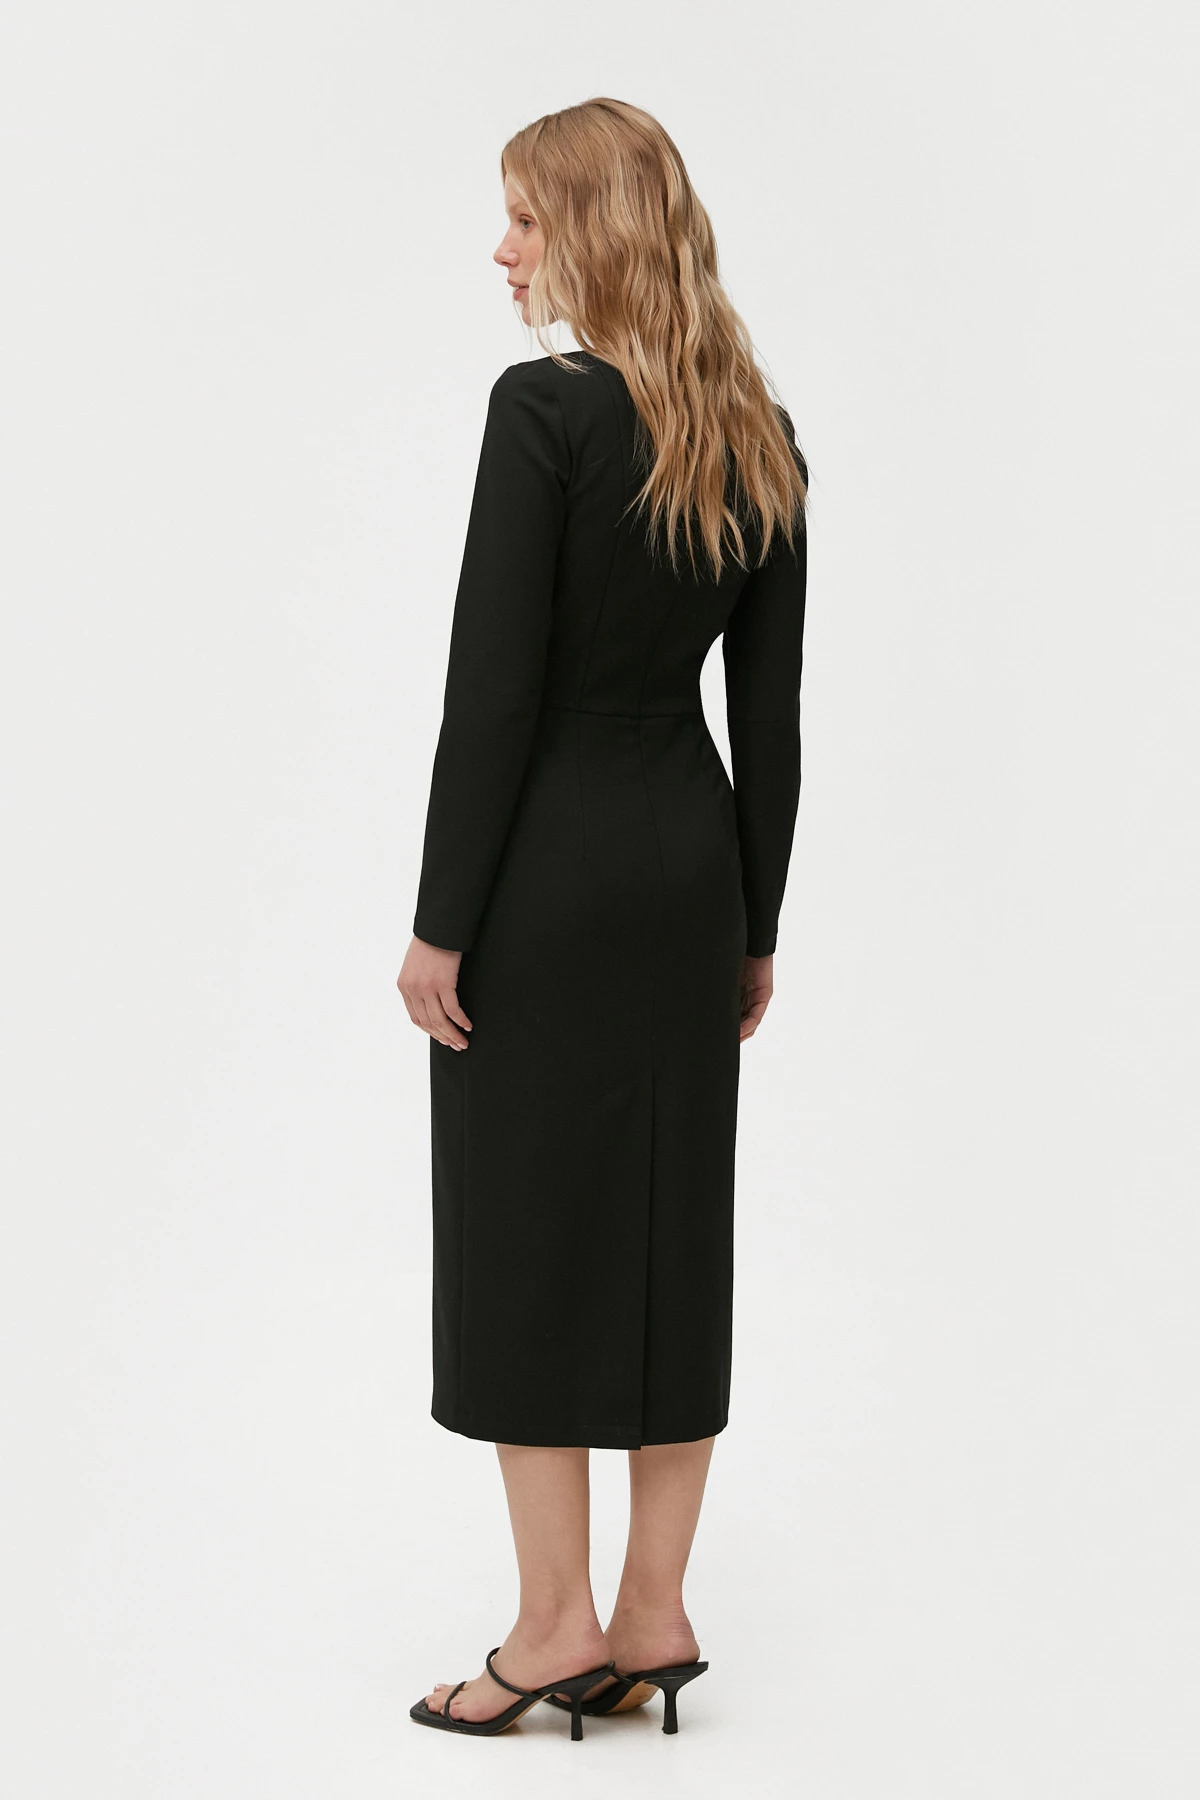 Black midi dress made of suiting fabric with wool, photo 4